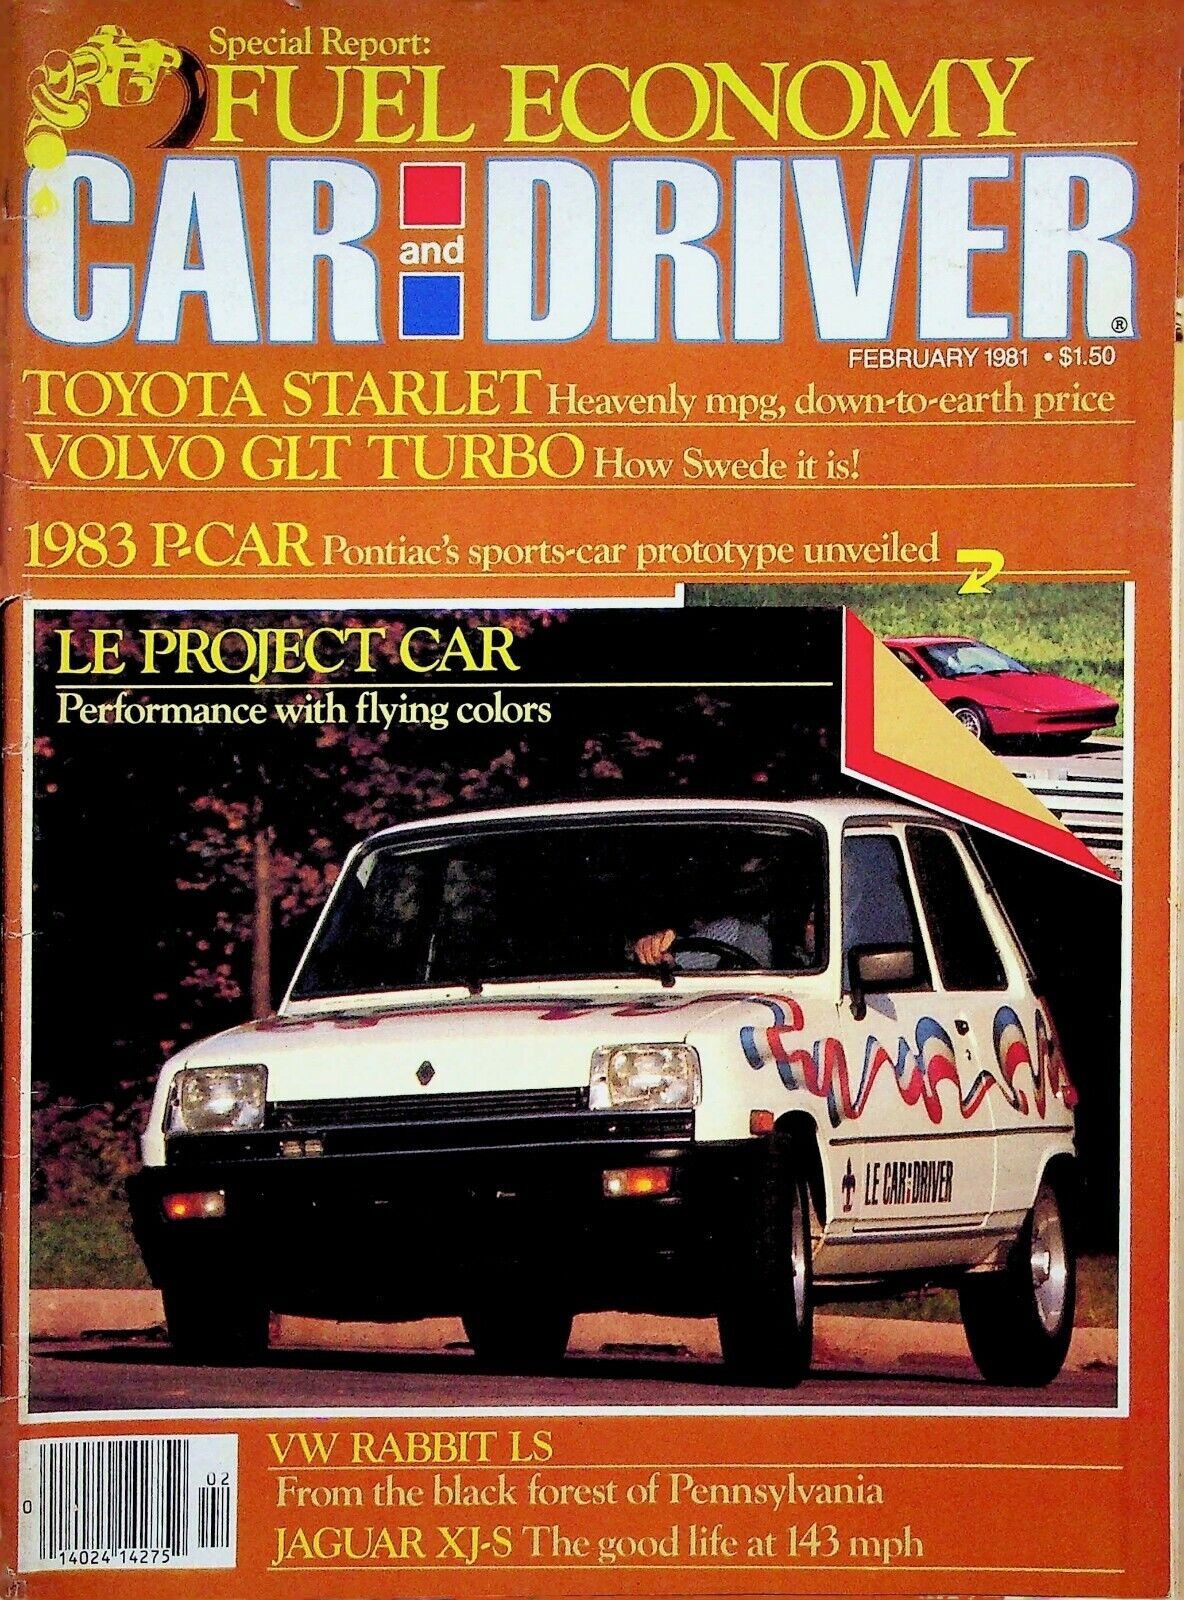 LE PROJECT - CAR AND DRIVER HOT ROD MAGAZINE, FEBRUARY 1981 VOLUME 26, NUMBER 8